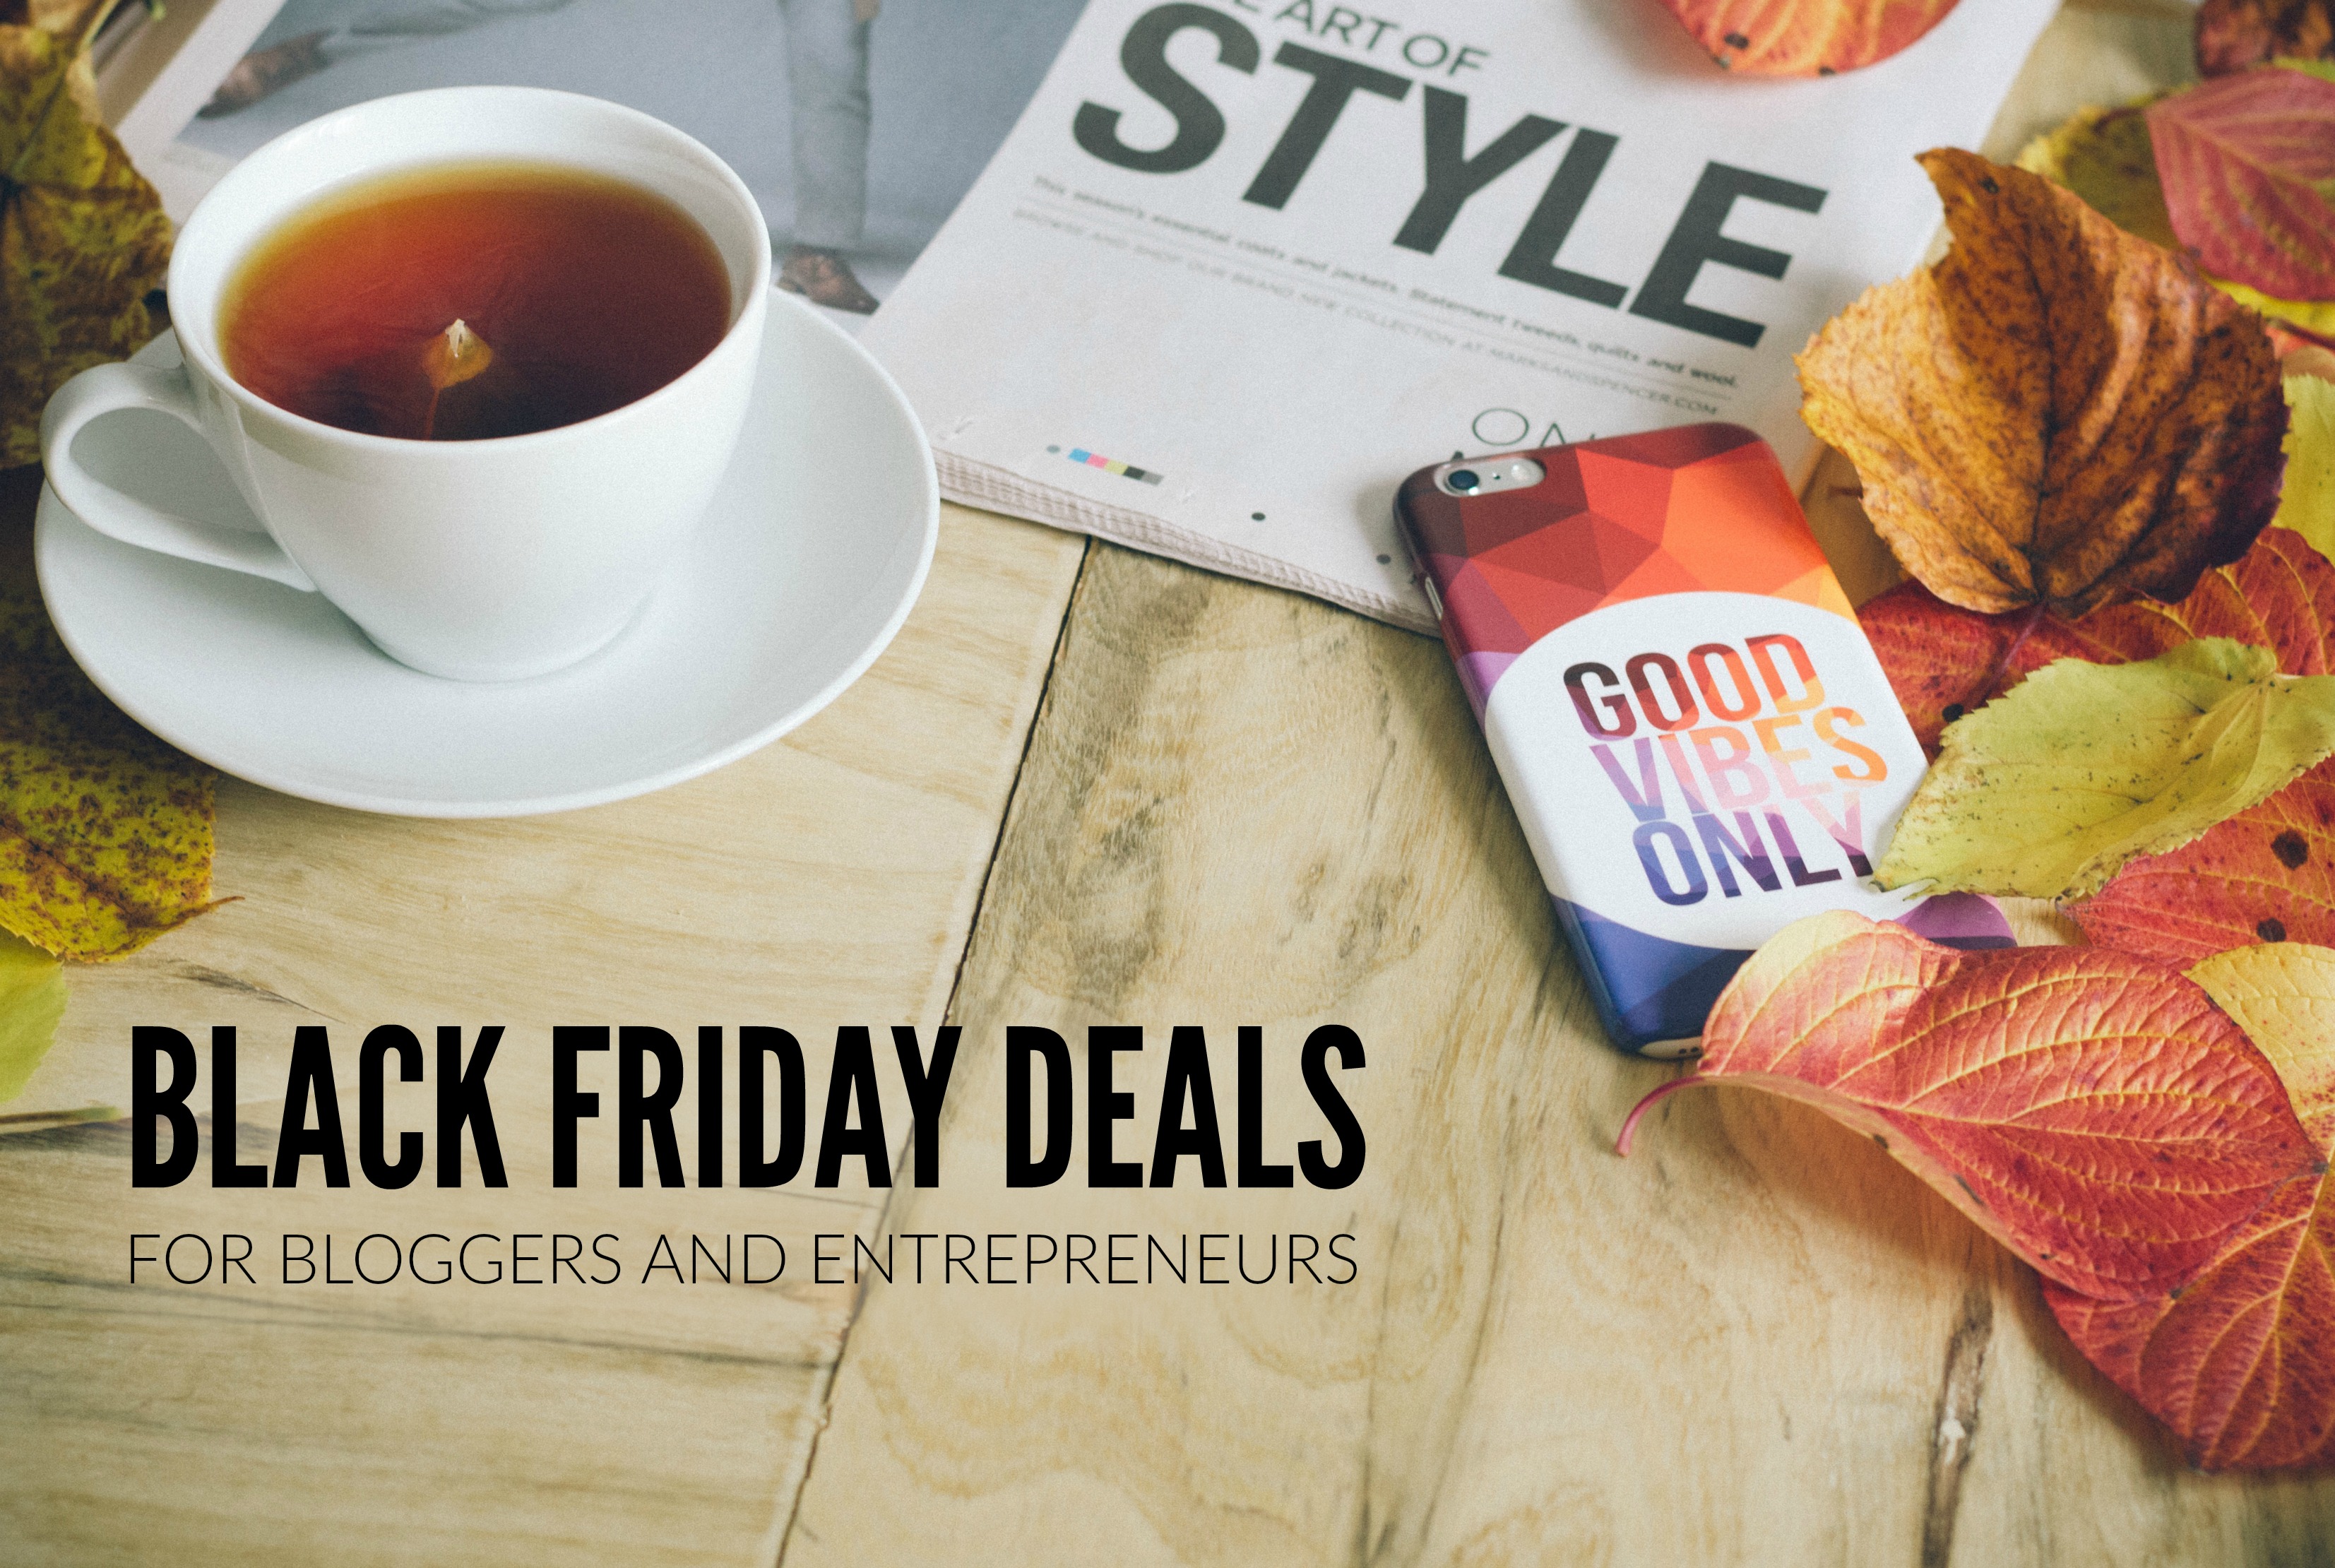 Black Friday deals every blogger should know about!